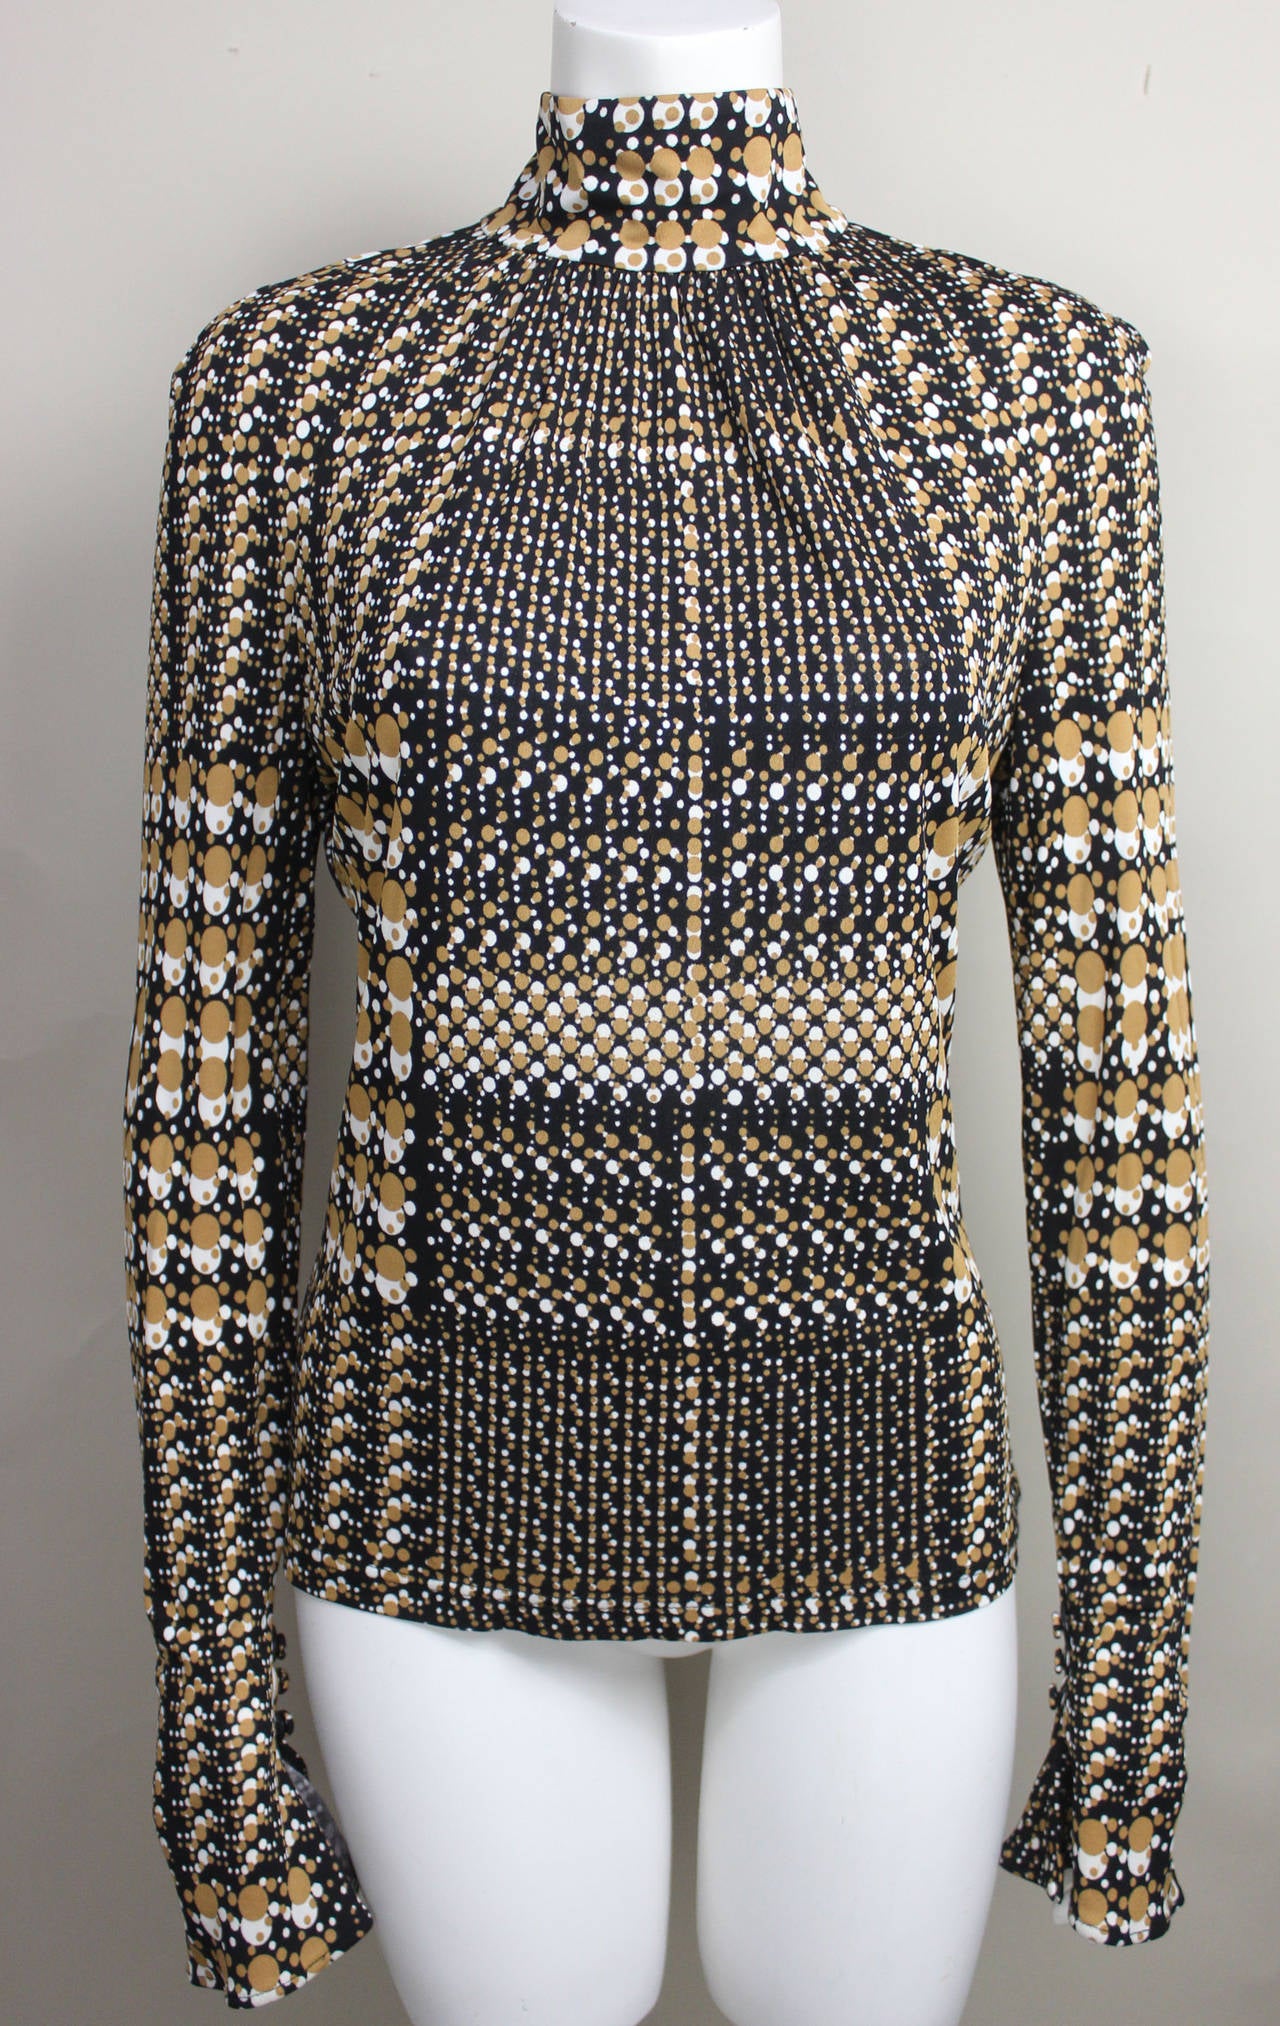 This slinky Versace blouse from the 1990's features a unique brown, black and white pattern. The op print when looked at from afar, create an illusion of an intricate  plaid. The blouse features a high neck with a four button closure and small